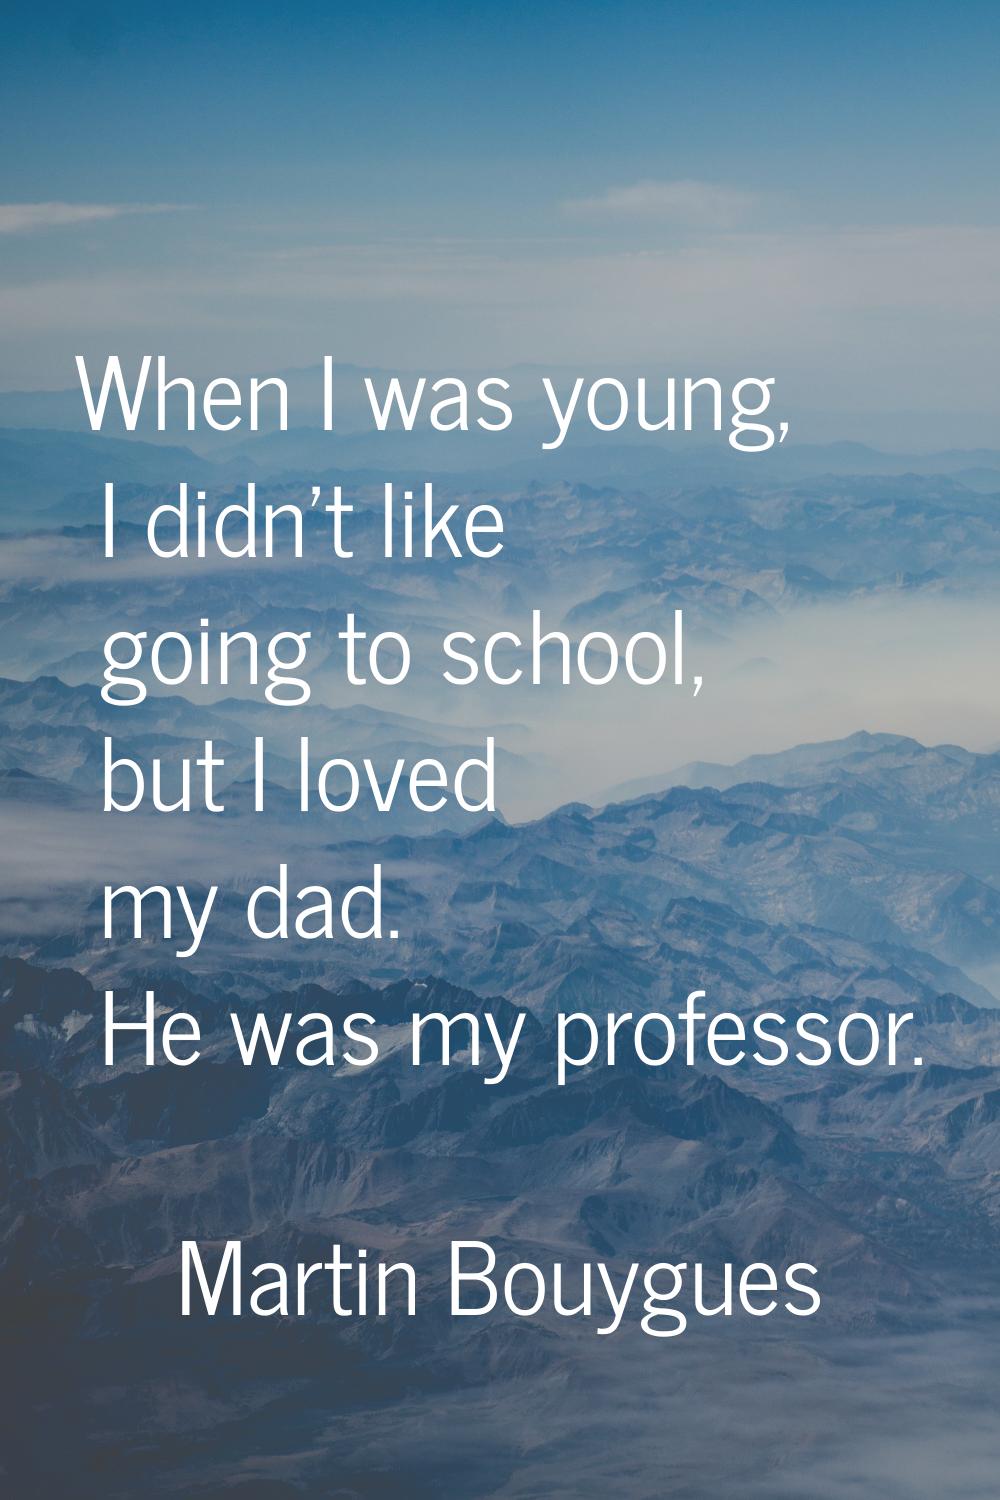 When I was young, I didn't like going to school, but I loved my dad. He was my professor.